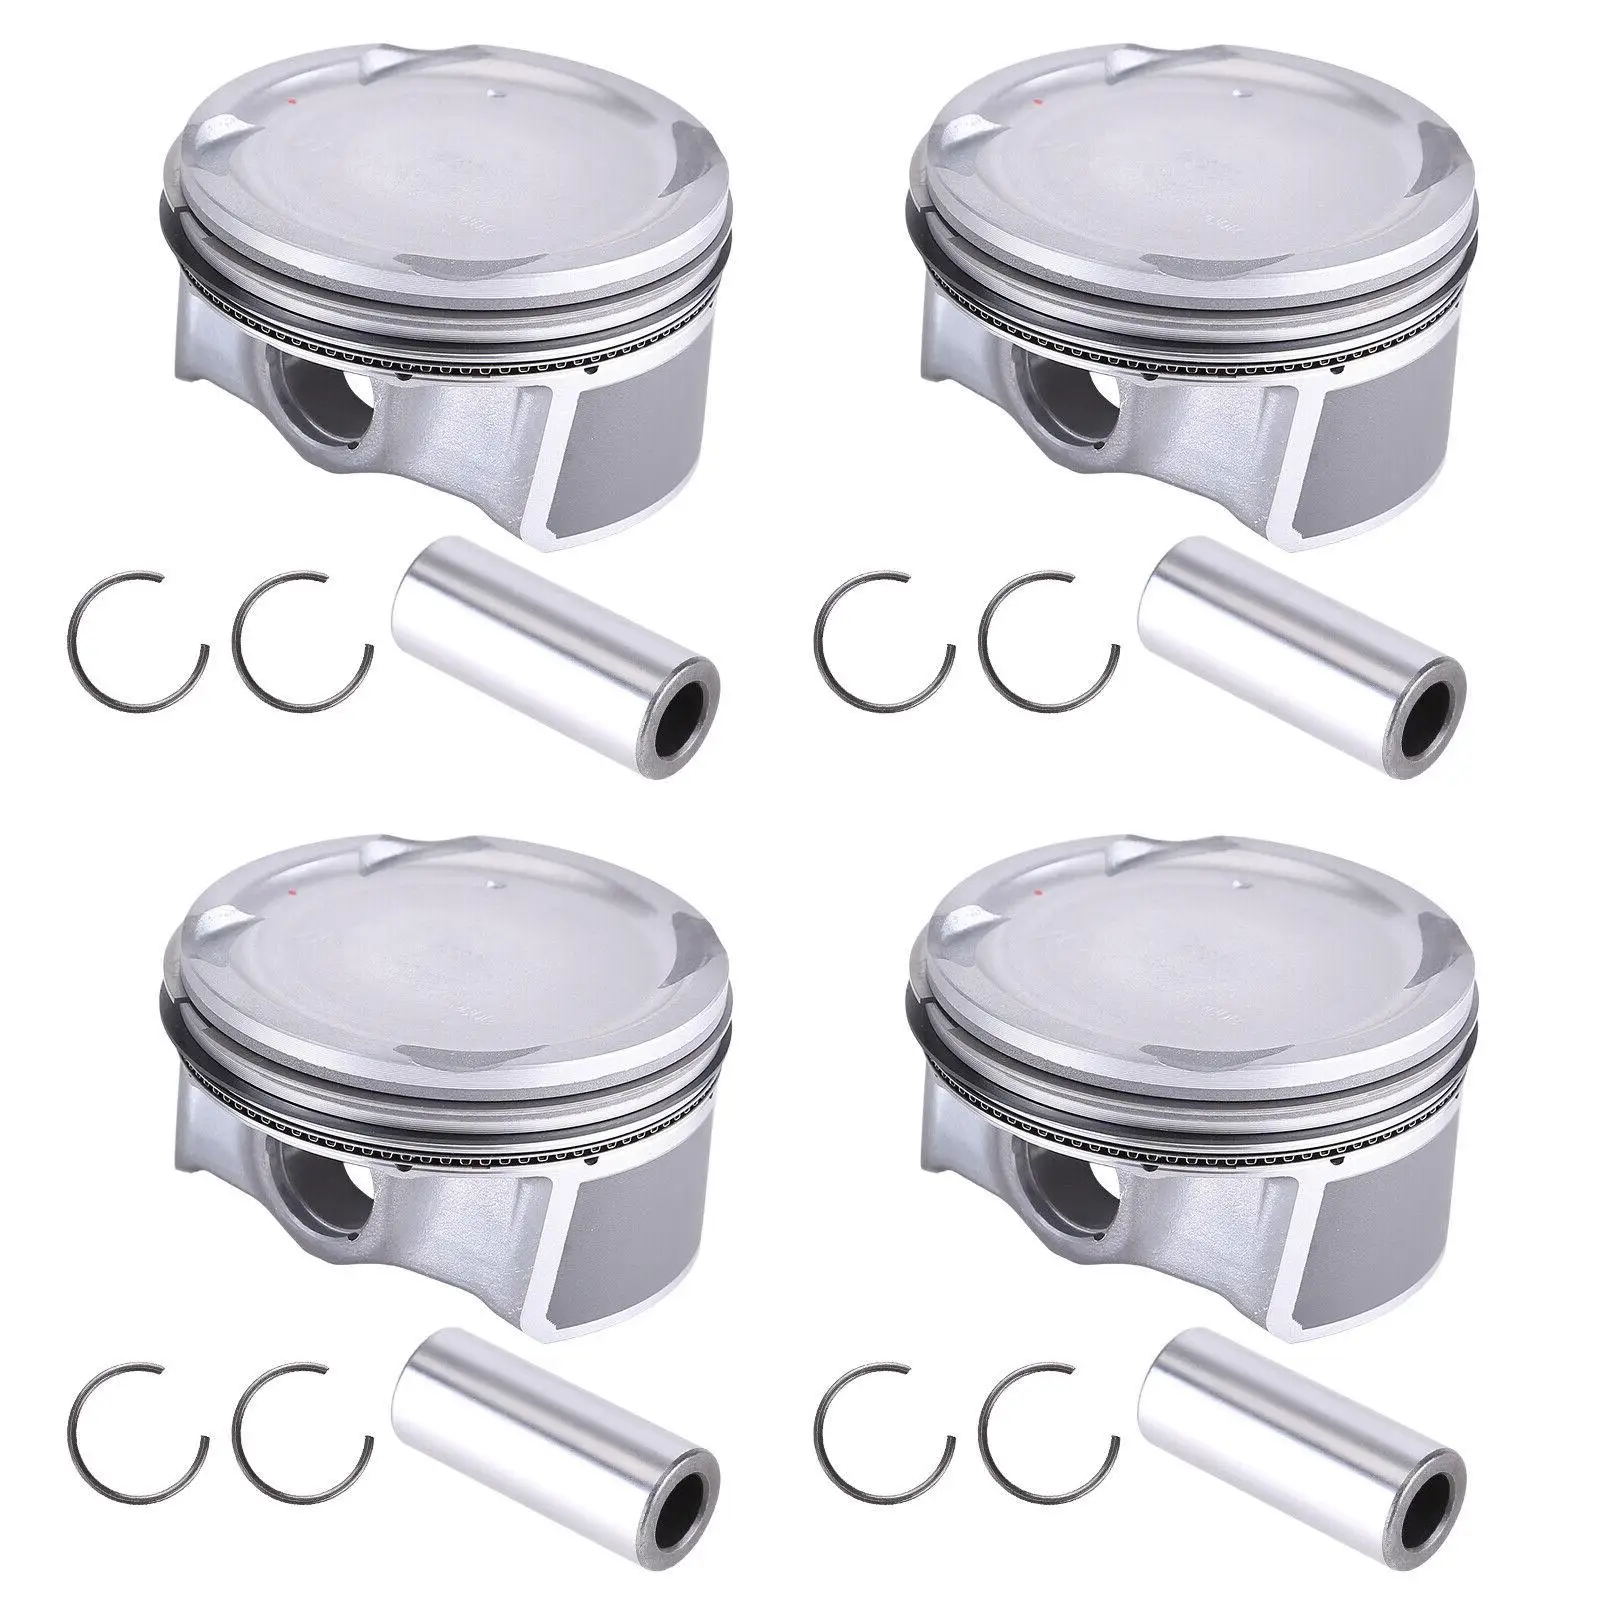 4 Pieces 230412E100 Replaces Durable Spare Parts Piston Set Engine Piston & Pin Ring Assembly for Kia Forte 2.0L 2014-2018